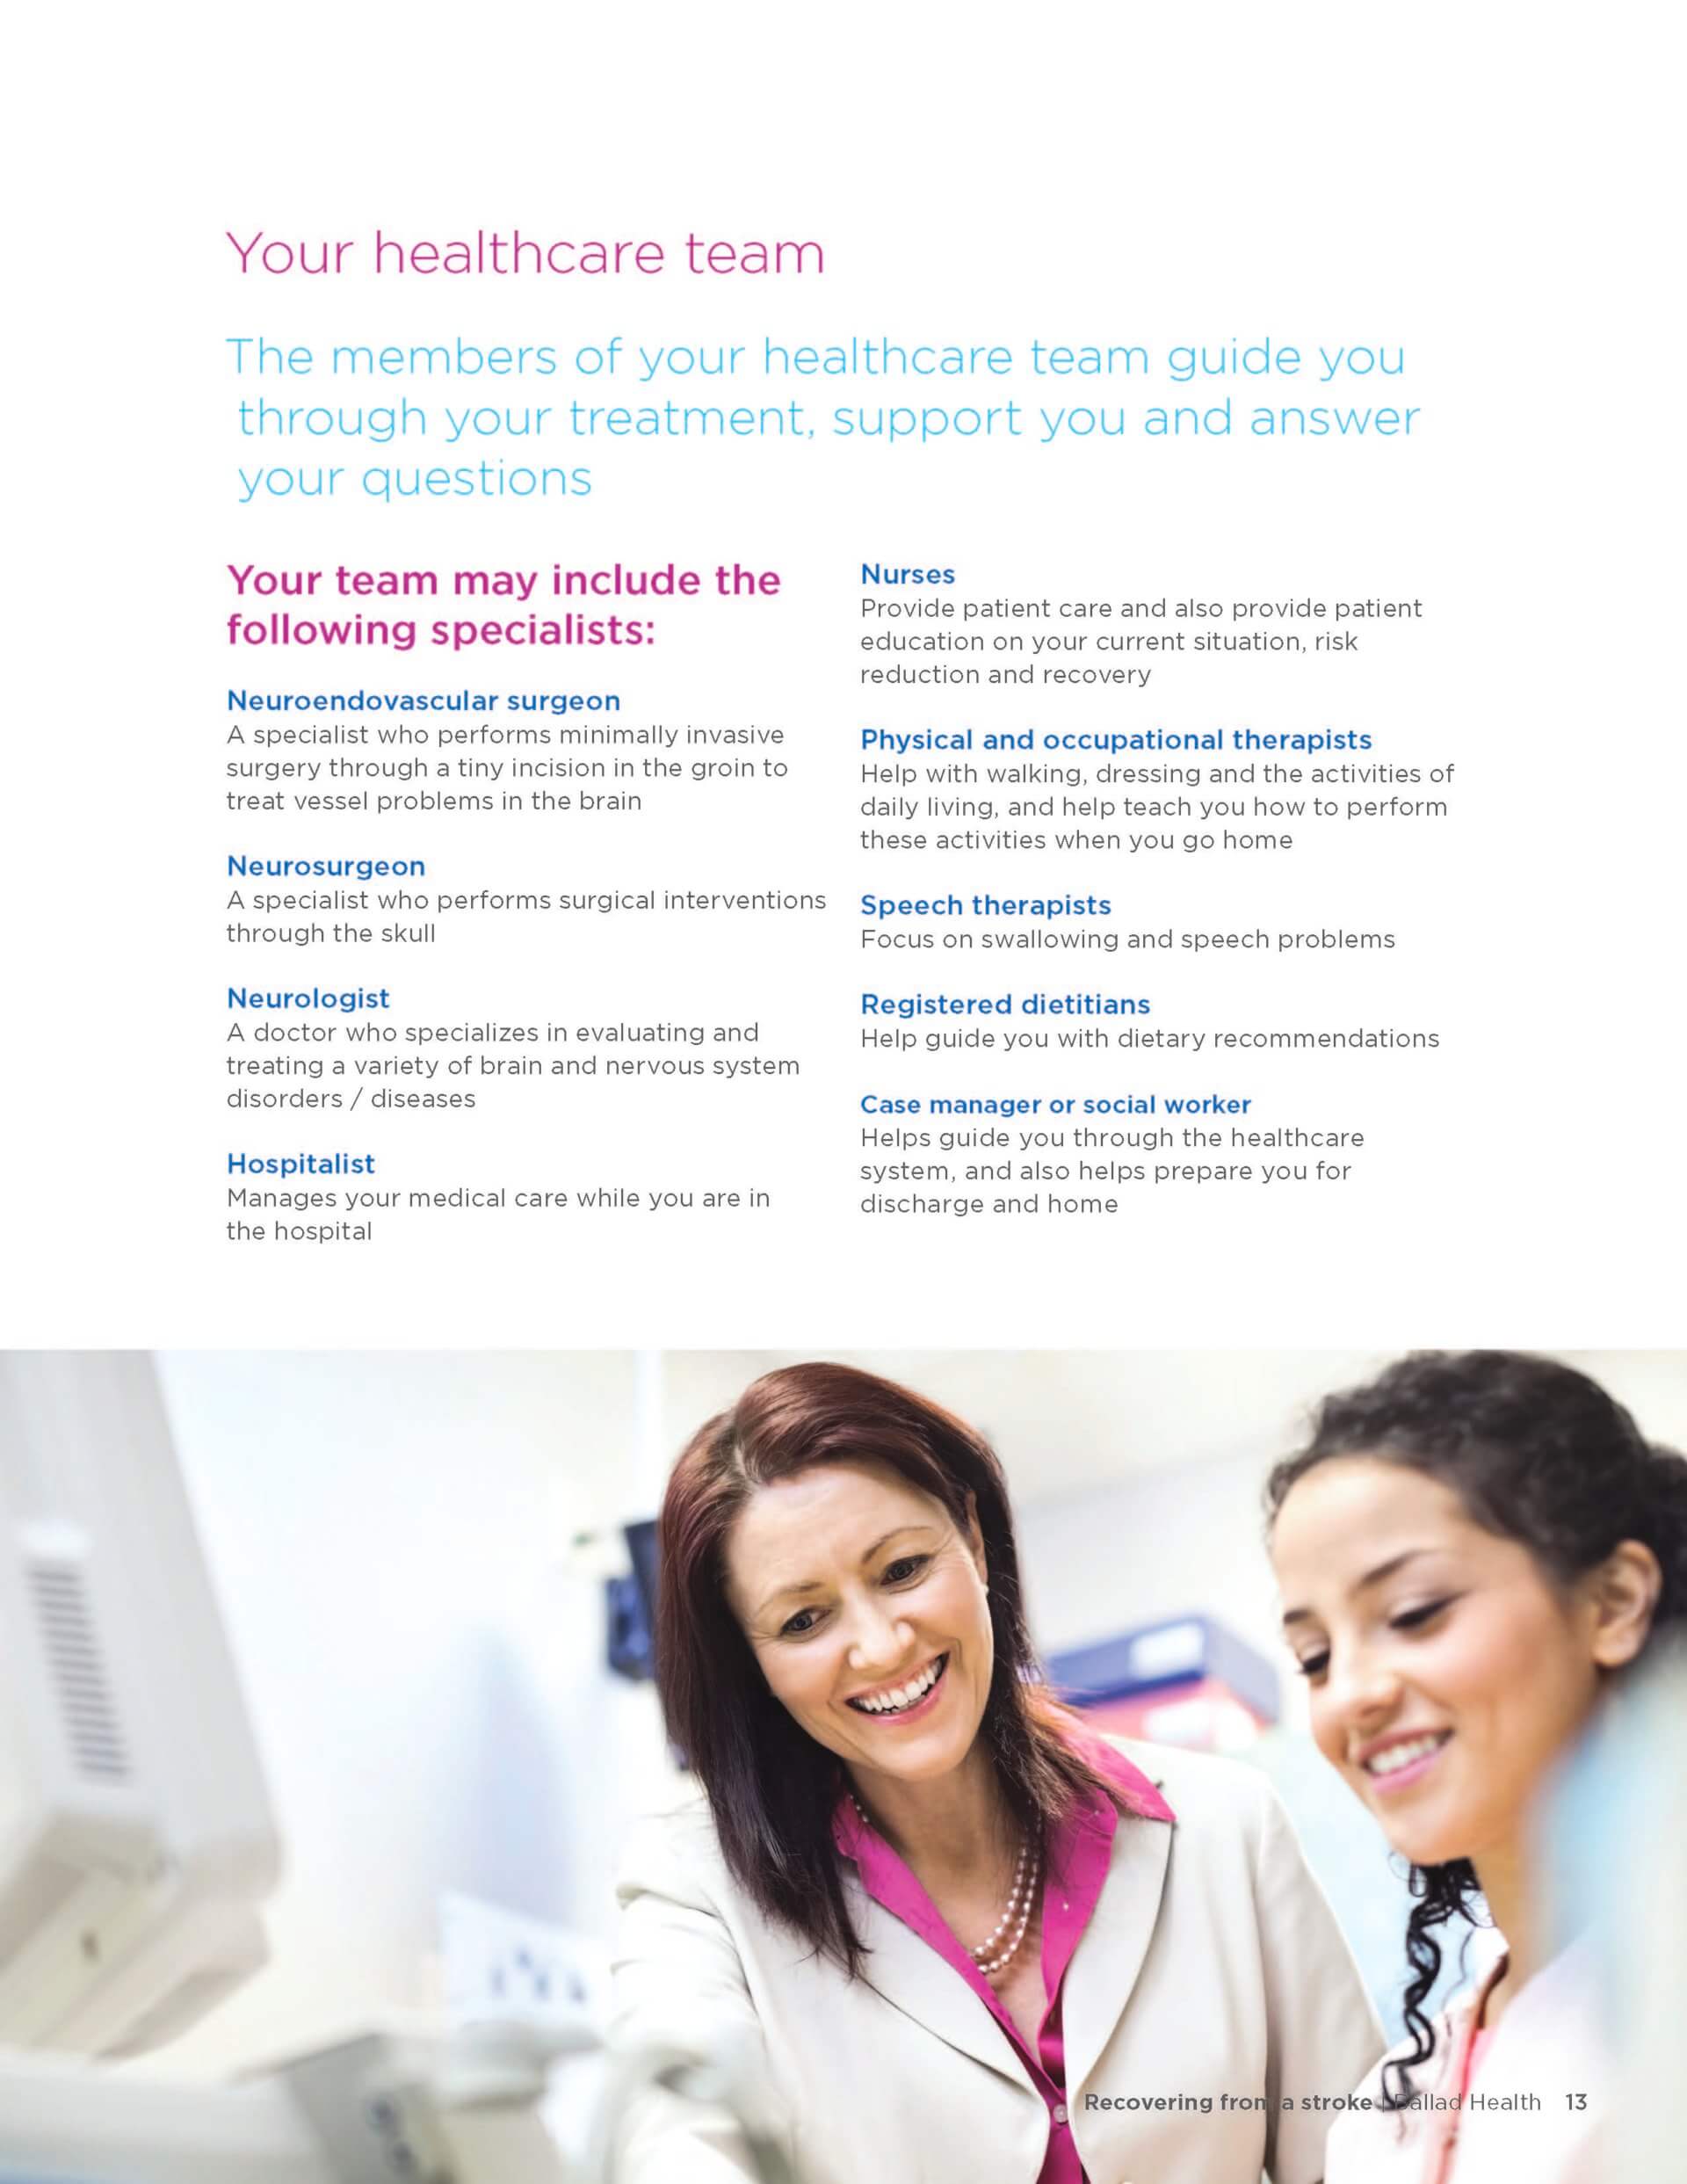 Your healthcare team